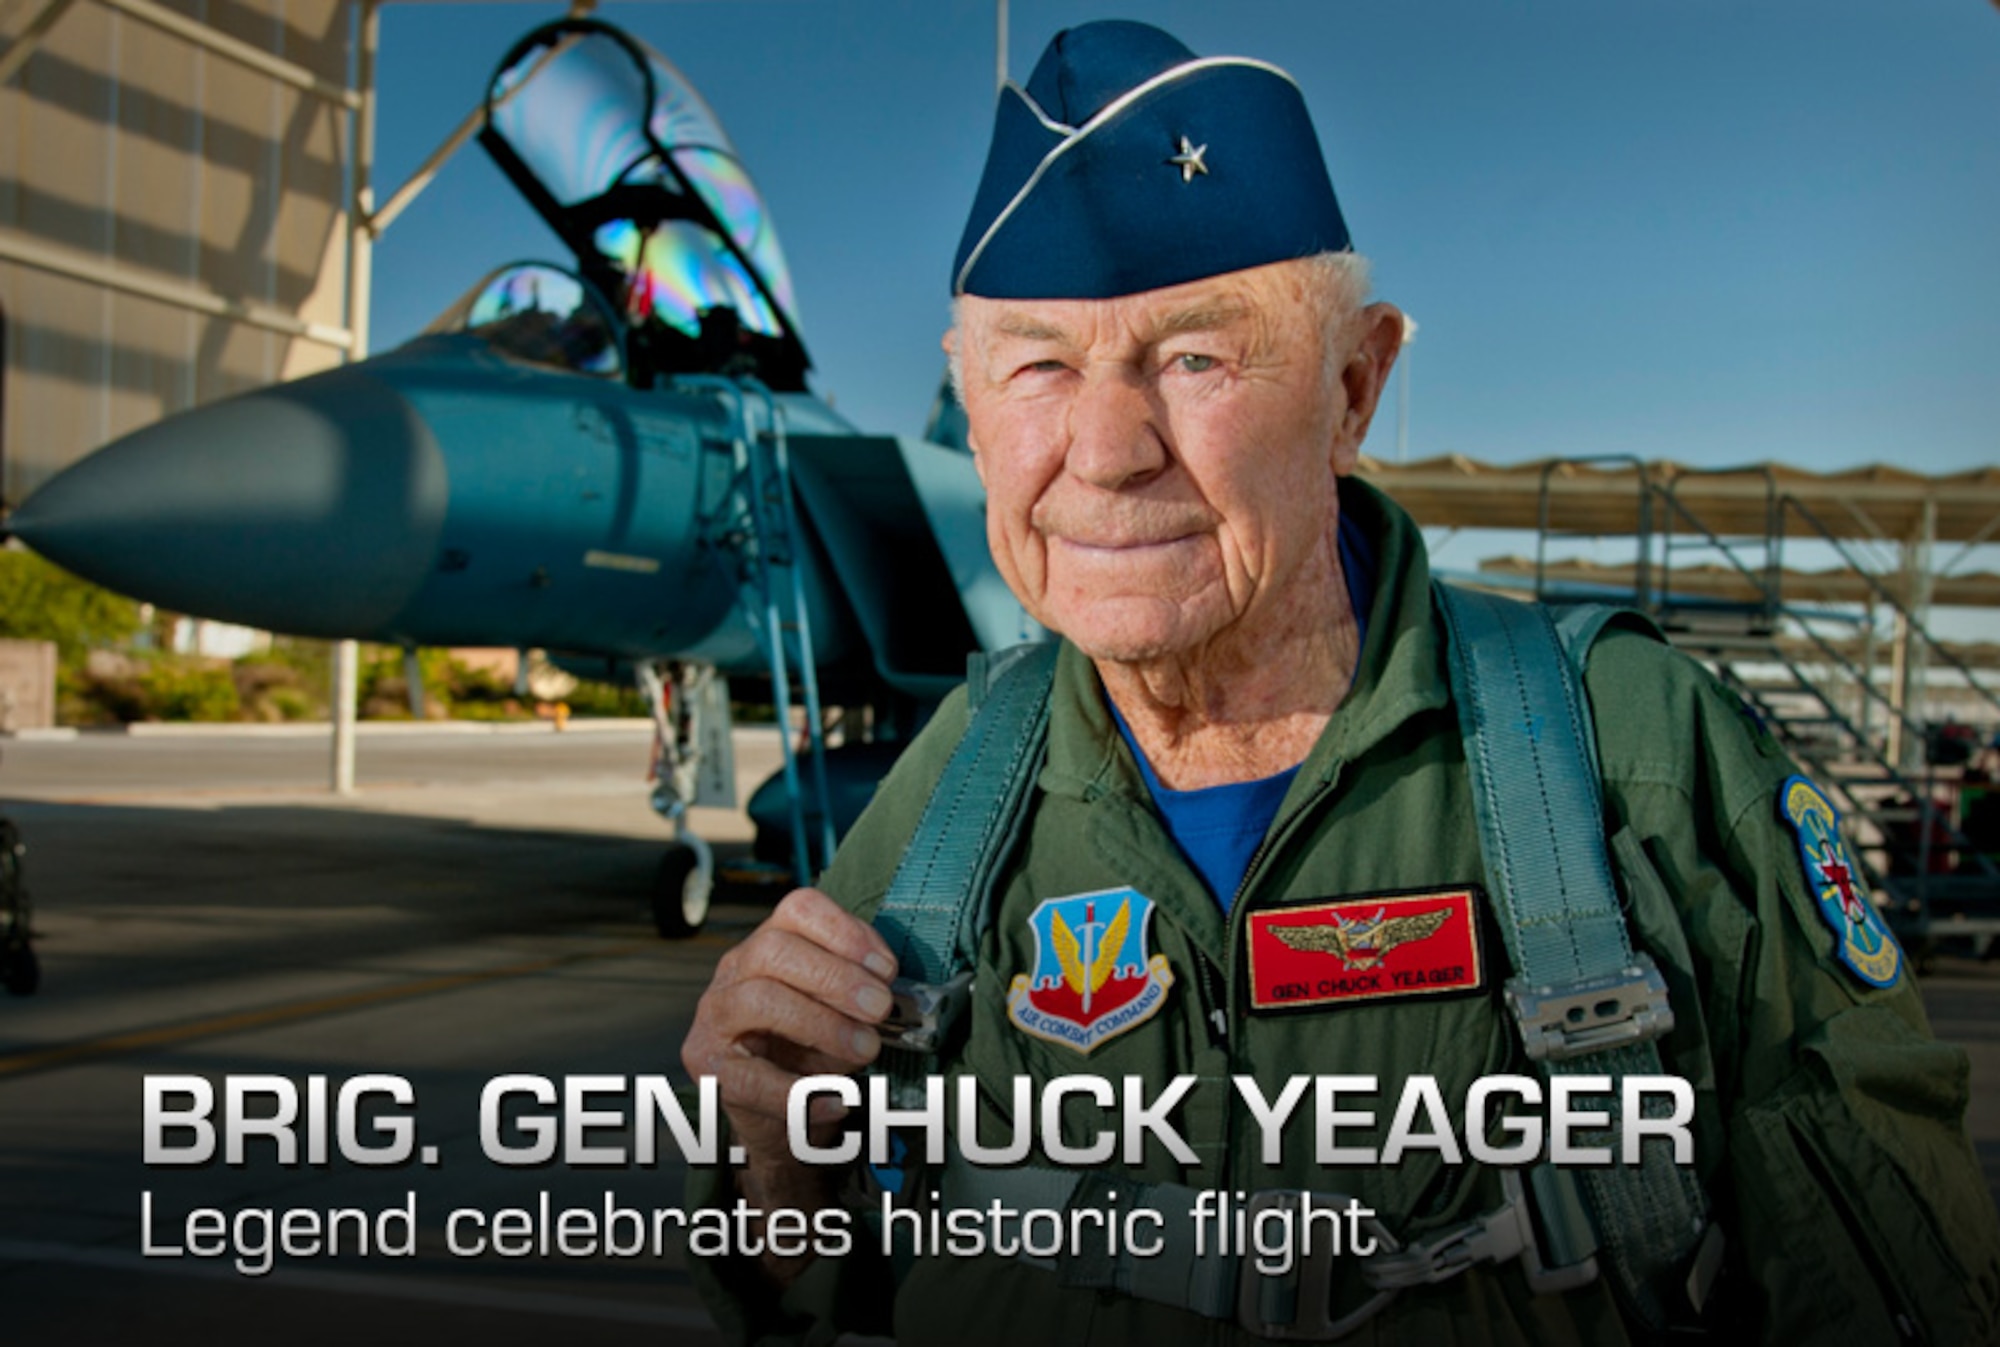 Retired United States Air Force Brig. Gen. Charles E. "Chuck" Yeager prepares to board an F-15D Eagle from the 65th Aggressor Squadron Oct. 14, 2012, at Nellis Air Force Base, Nev. In a jet piloted by Capt. David Vincent, 65th AGRS pilot, Yeager is commemorating the 65th anniversary of his historic breaking of the sound barrier flight Oct. 14, 1947, in the Bell X-1 rocket research plane named "Glamorous Glennis." Yeager was awarded the prestigious Collier Trophy in 1948 for this landmark aeronautical achievement. (U.S. Air Force graphic)
